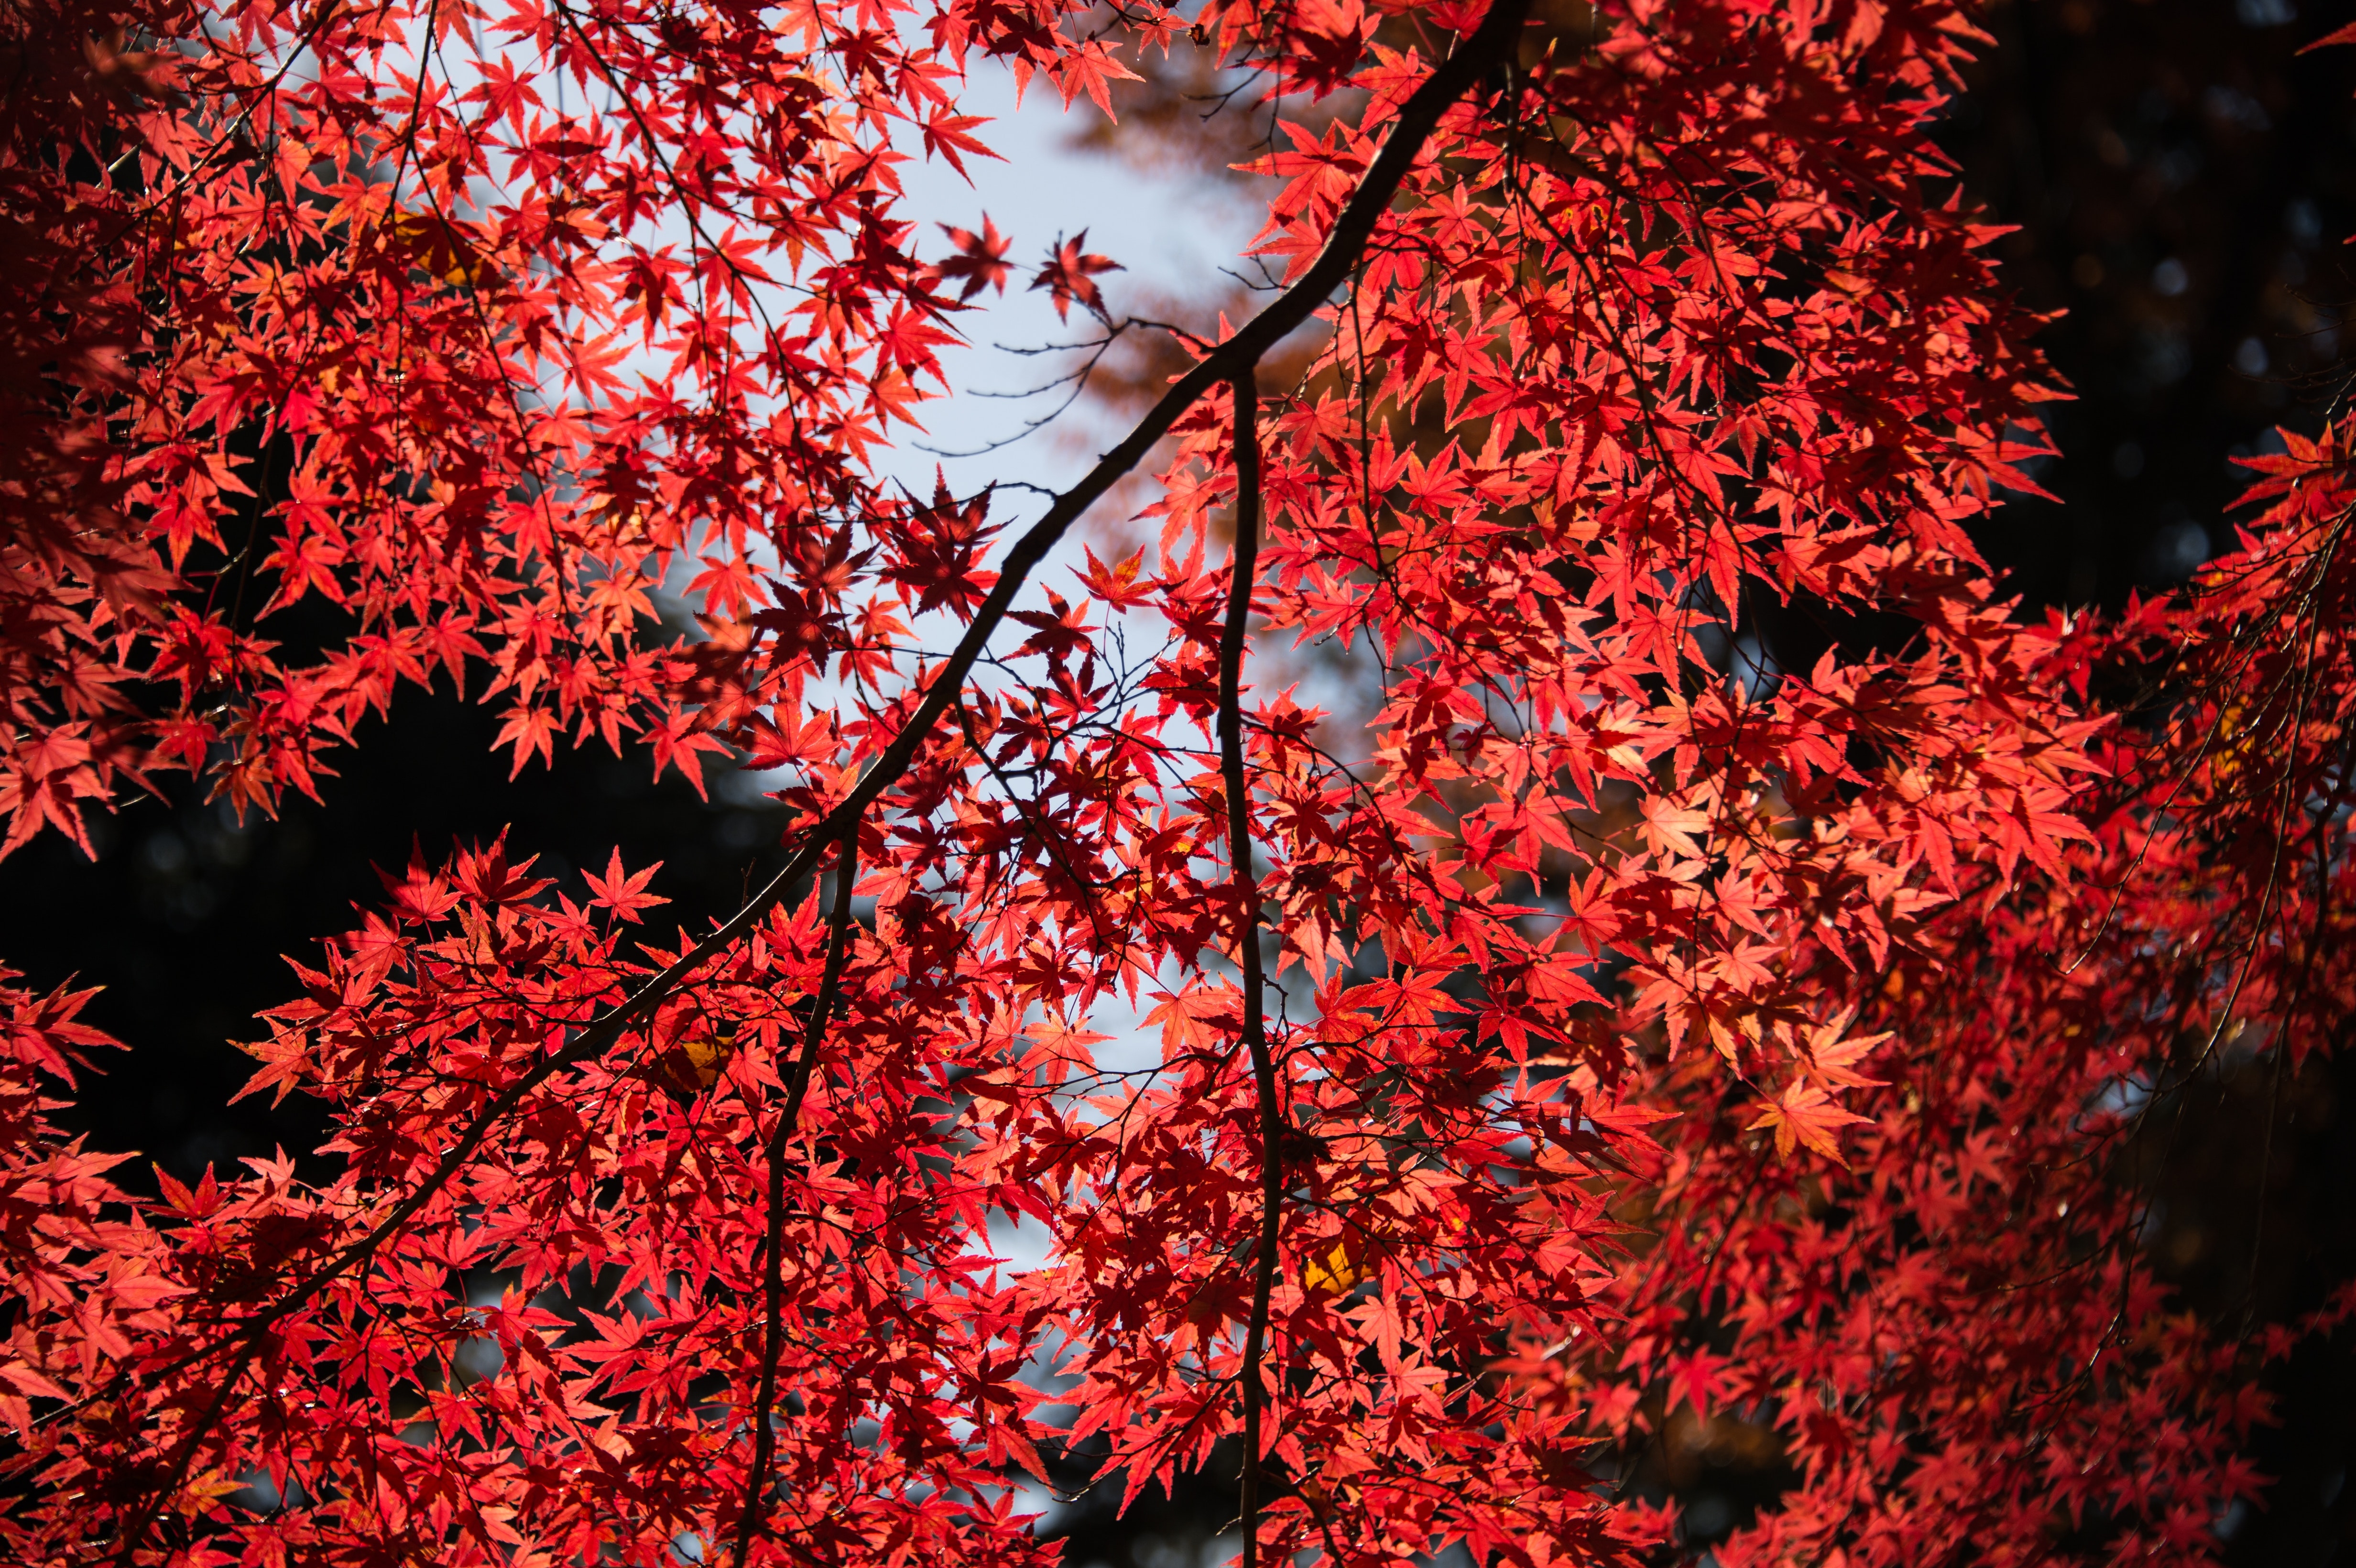 HD wallpaper, Red Leaves, Autumn, Tree Branches, Maple Tree, 5K